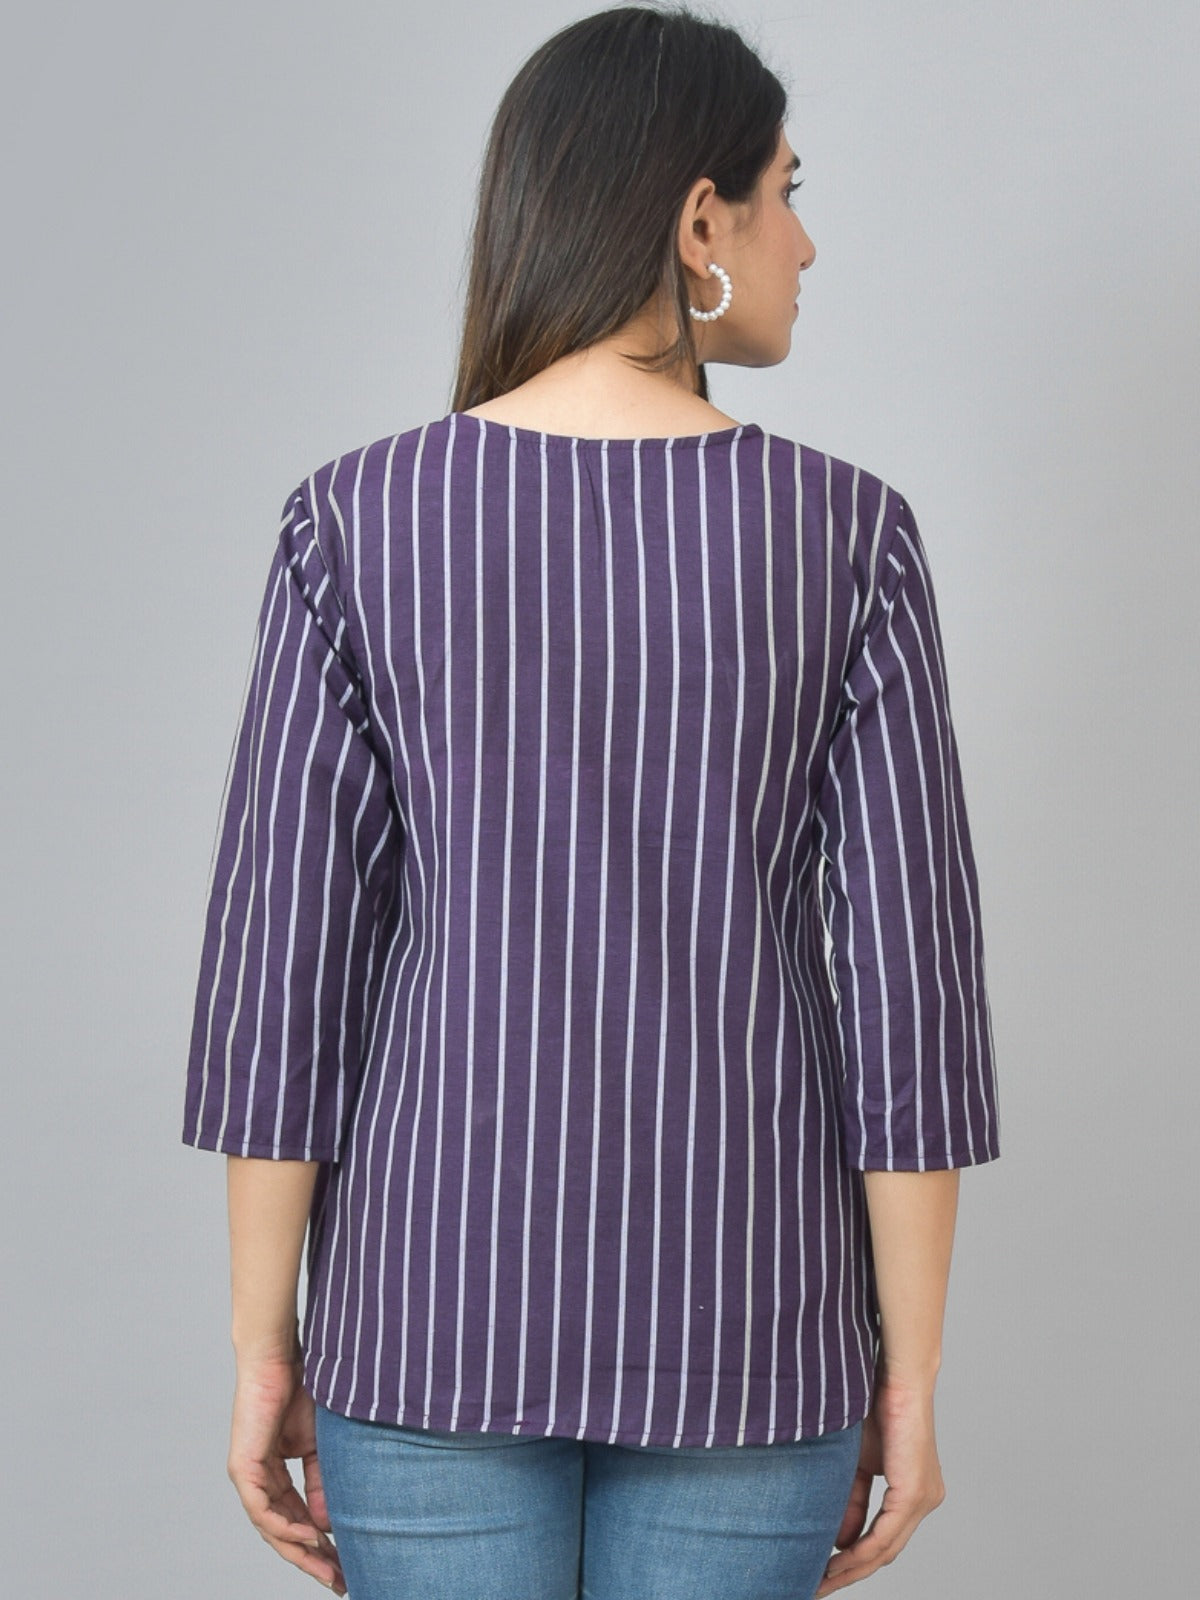 Pack Of 2 Grey And Dark Purple Striped Cotton Womens Top Combo